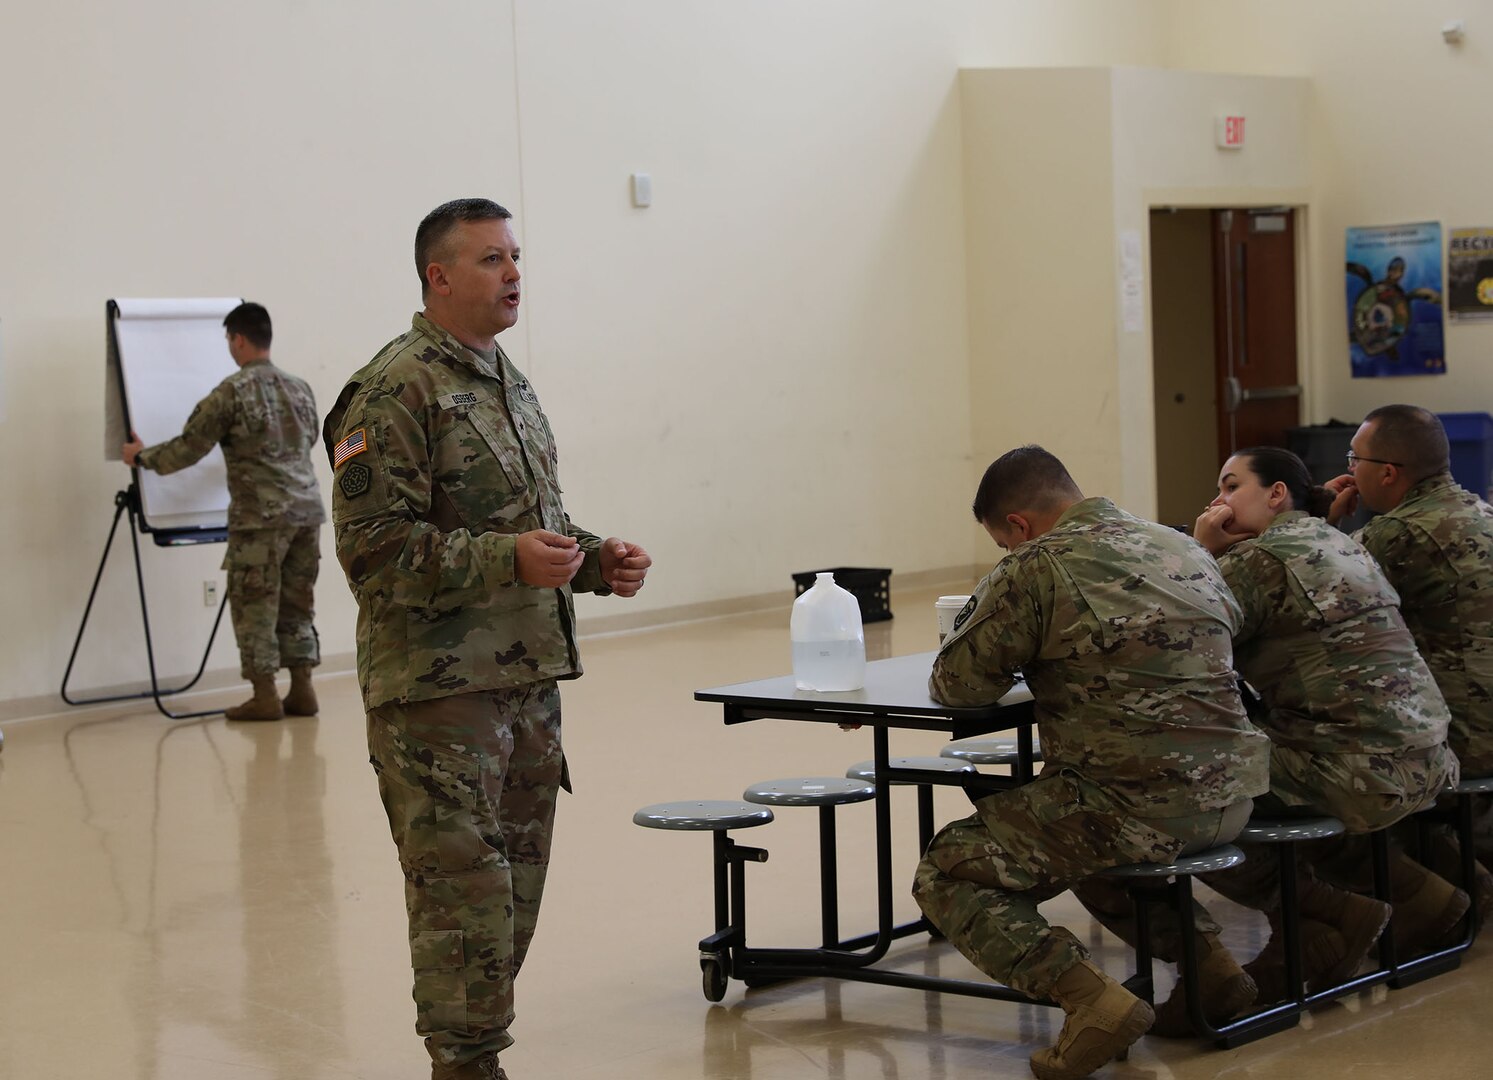 Brig. Gen. Justin Osberg, Deputy Assistant Adjutant General of the Army Illinois Joint Force Headquarters, delivers a brief to Soldiers of the 933rd Military Police Company about Task Force Restore Trust at the North Central Army Reserve Intelligence Support Center, Fort Sheridan, Illinois, September 24, 2022.